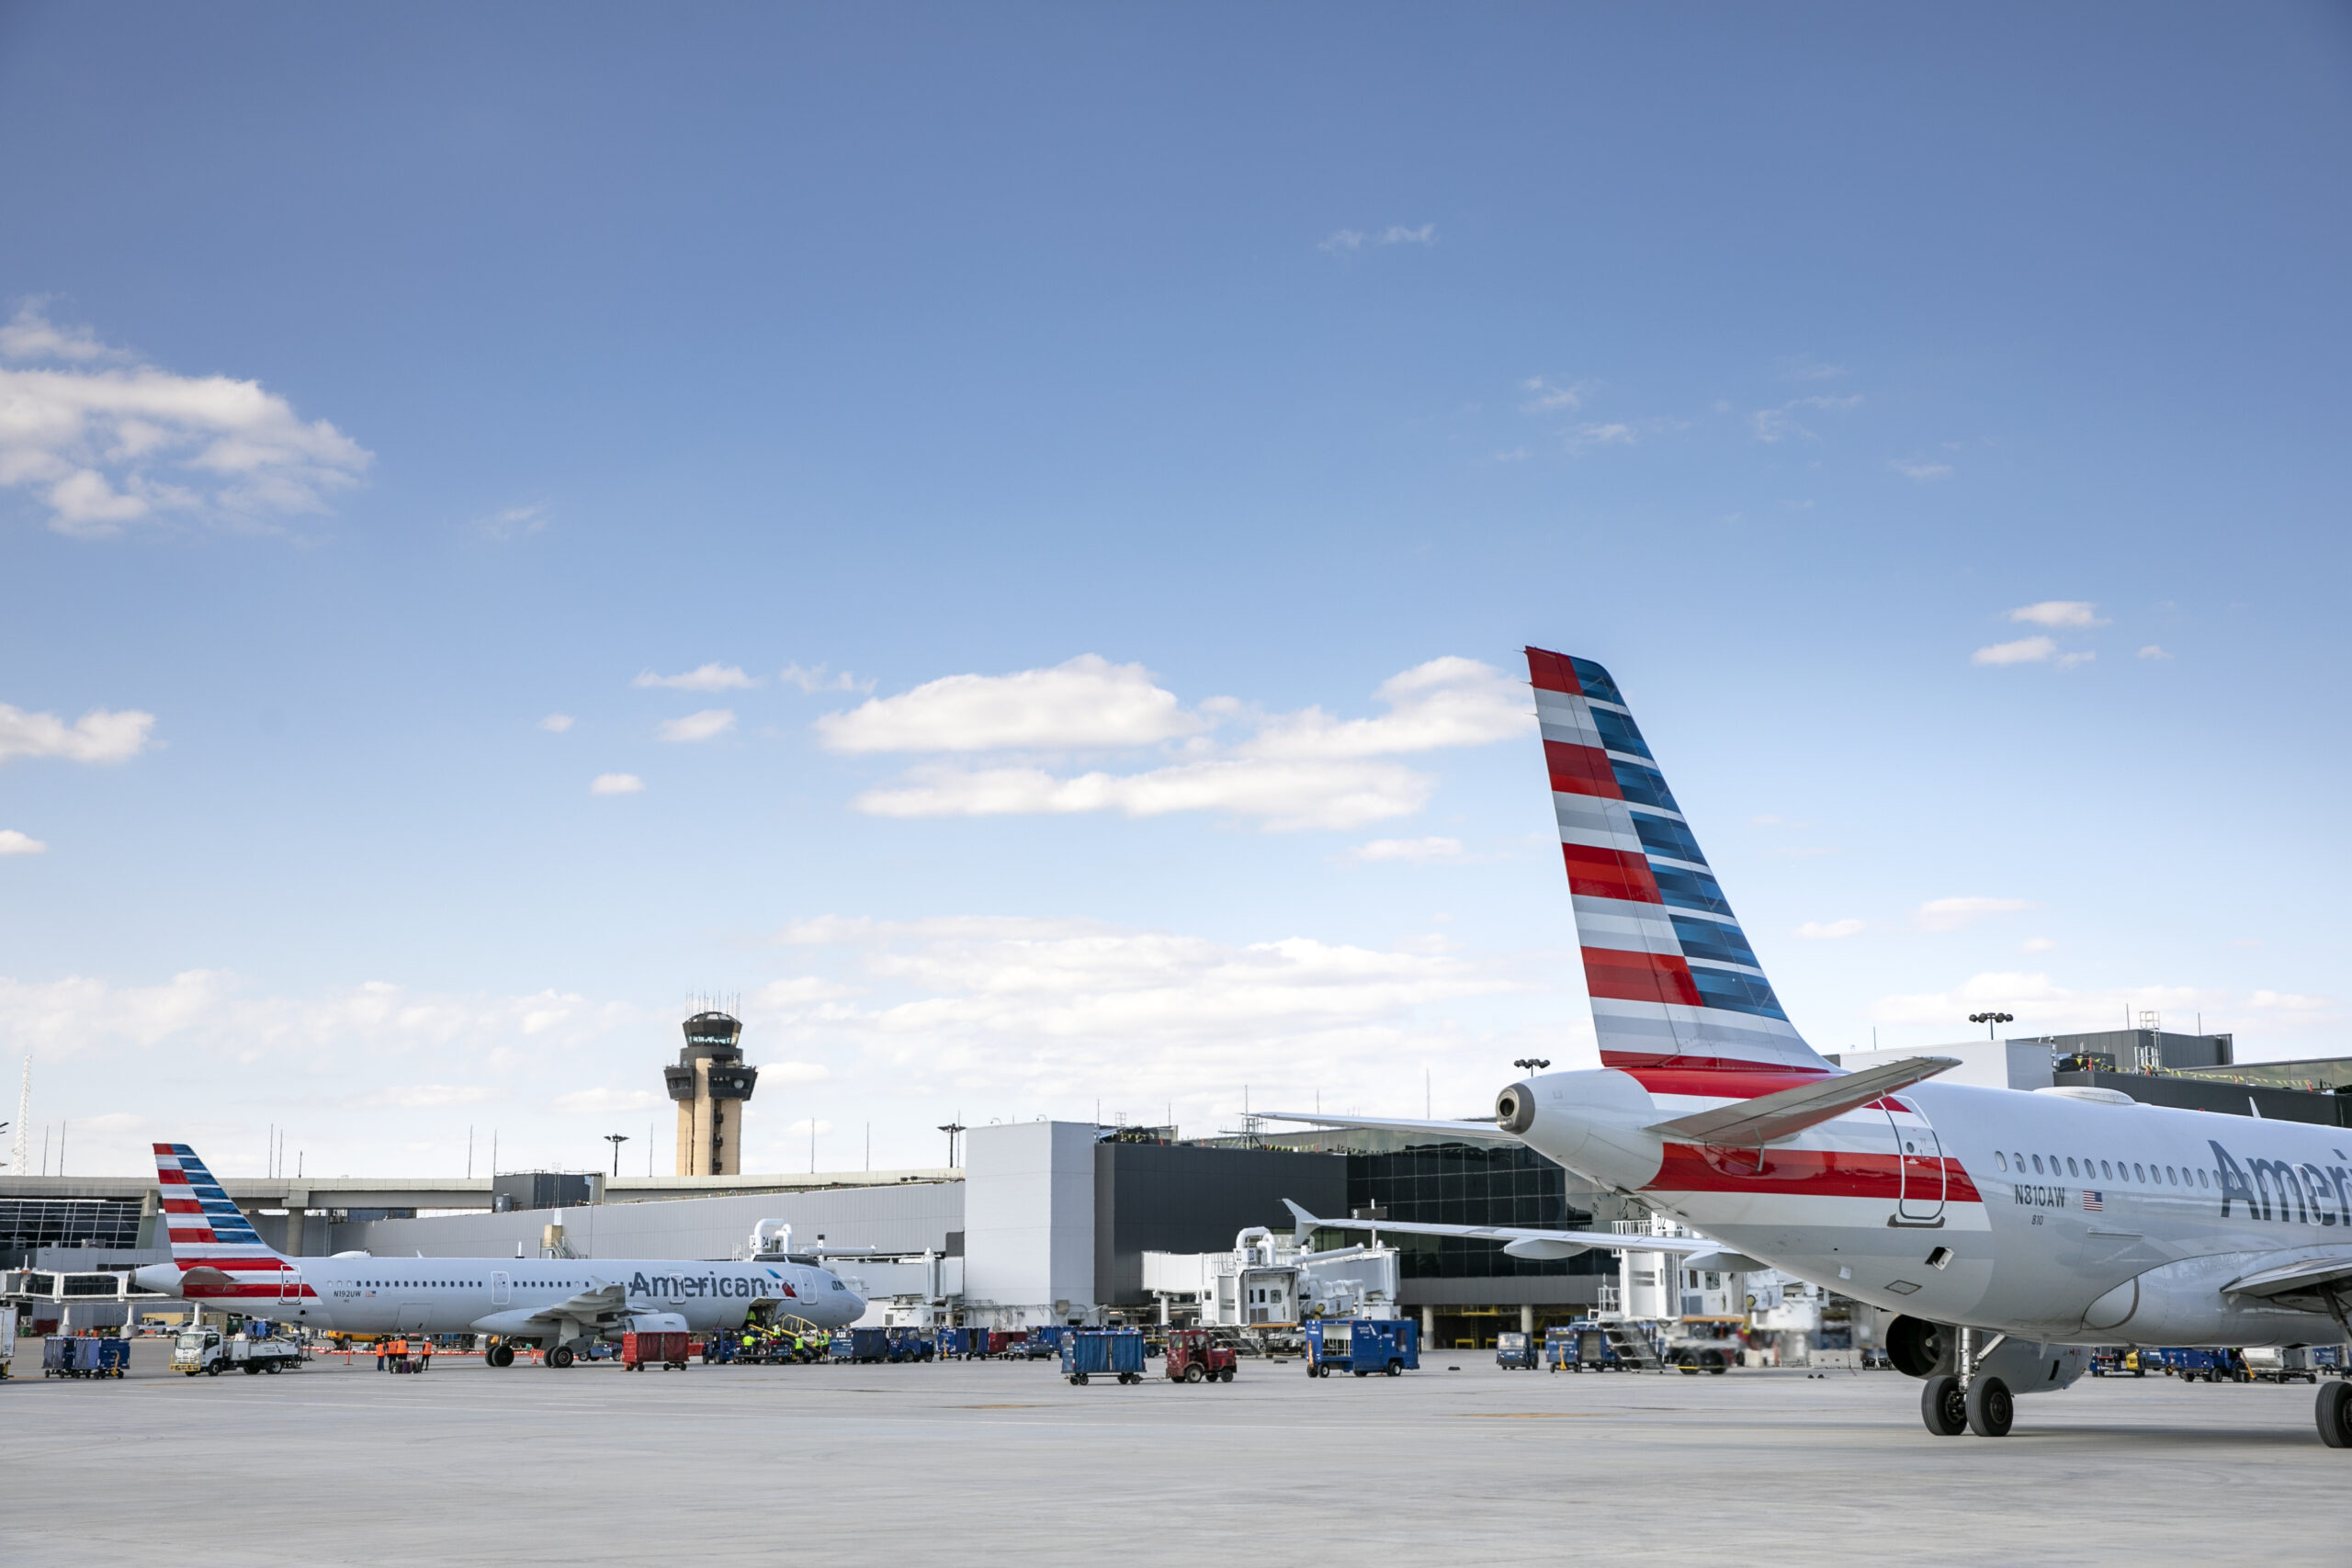 American Airlines at Dallas Fort Worth International Airport